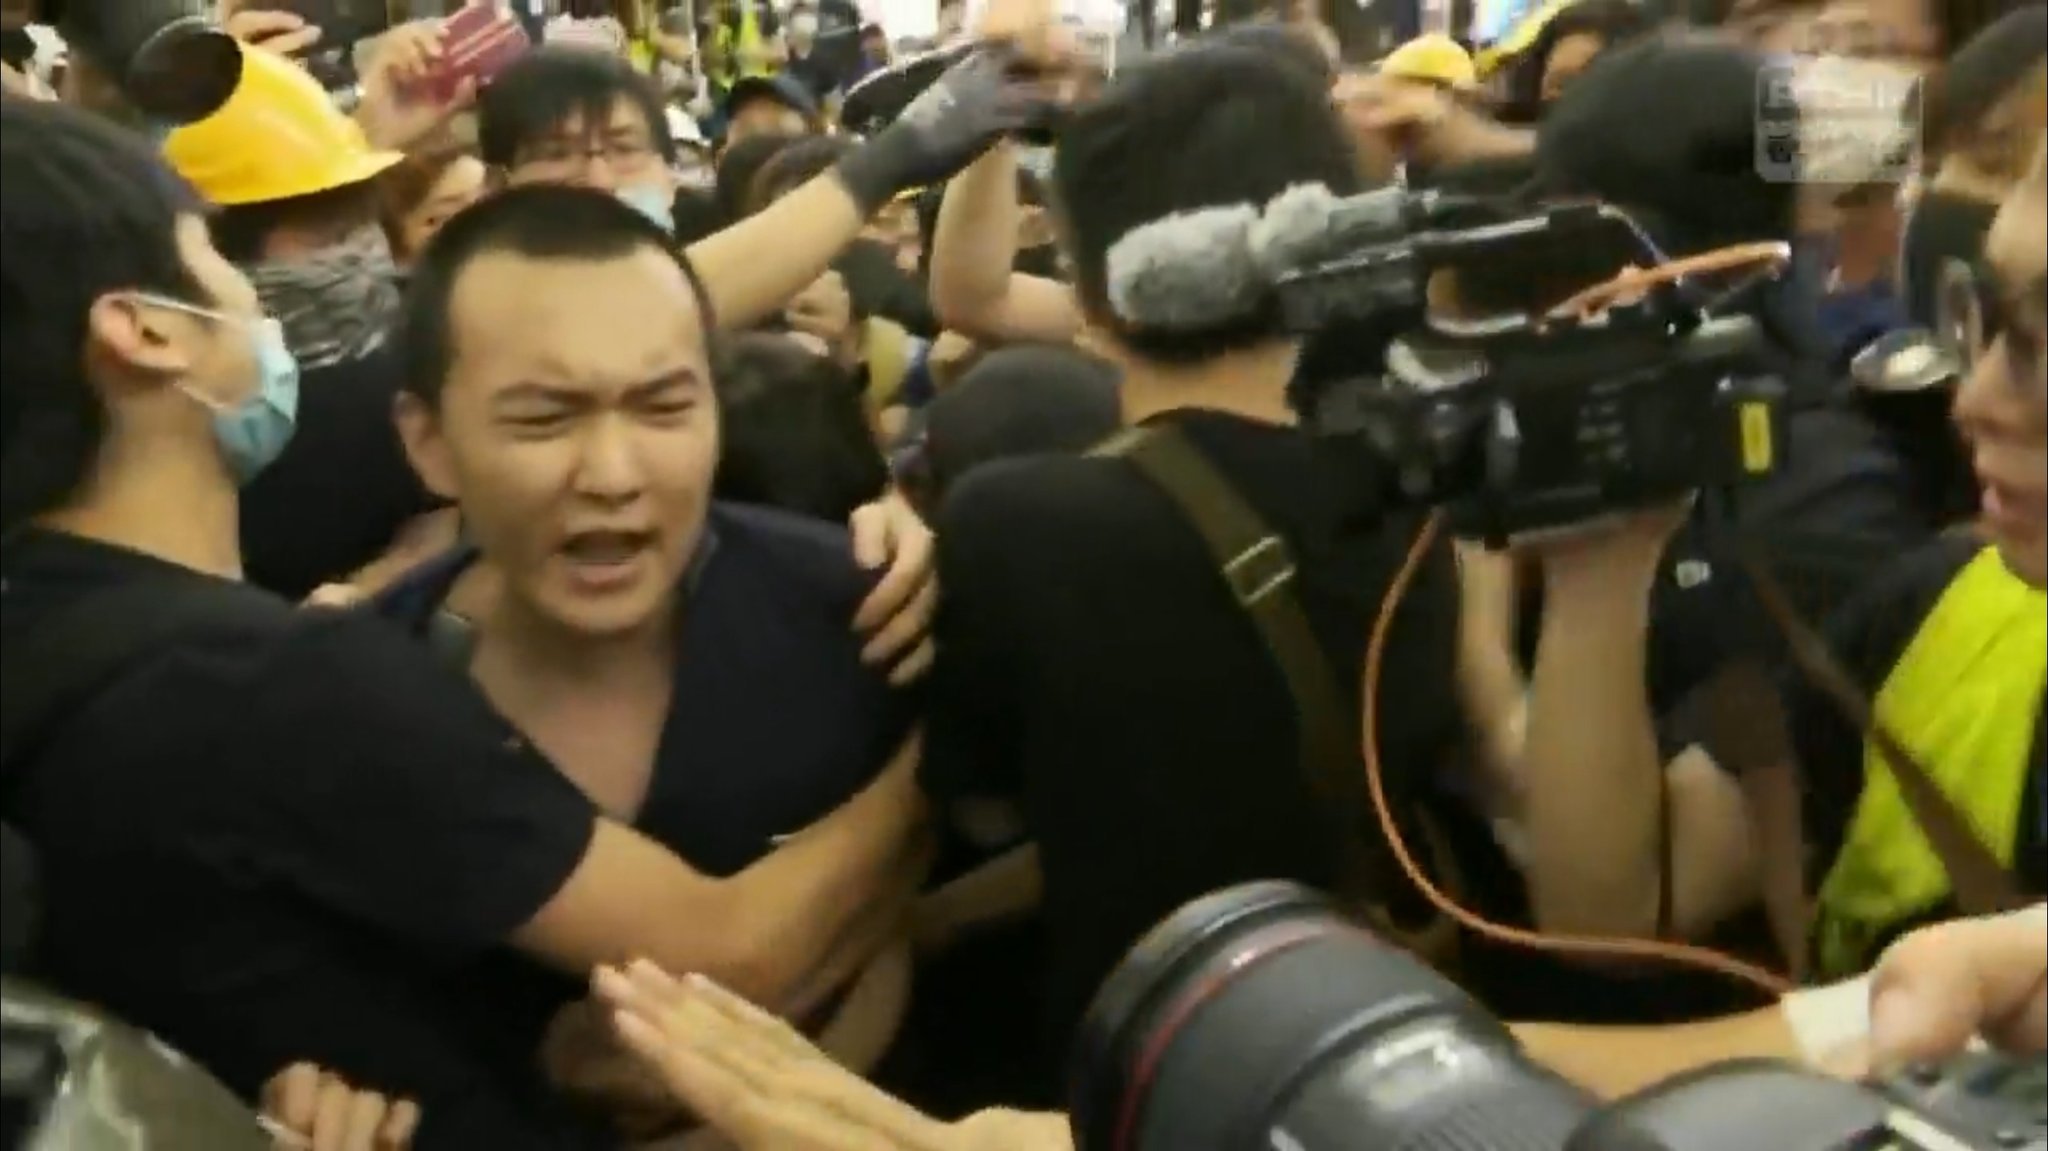 The journalist, Fu Guohao, being attacked by protesters shortly before being tied up.